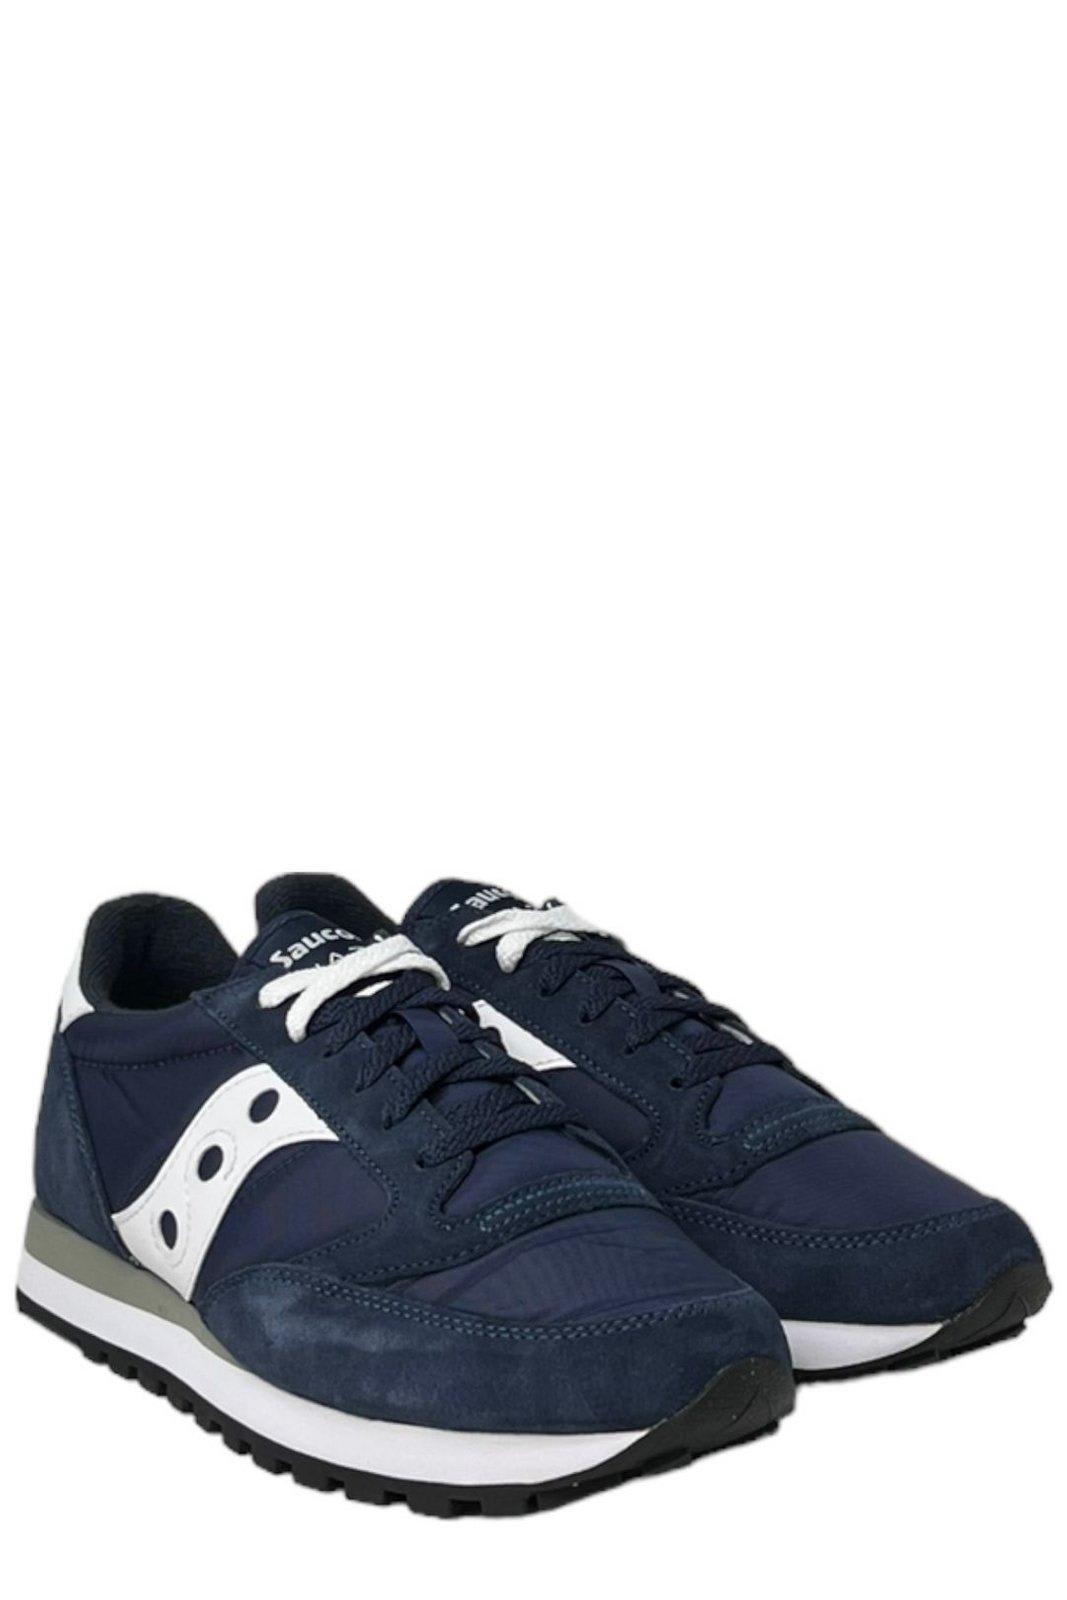 Shop Saucony Jazz Original Lace-up Sneakers In Navy/white